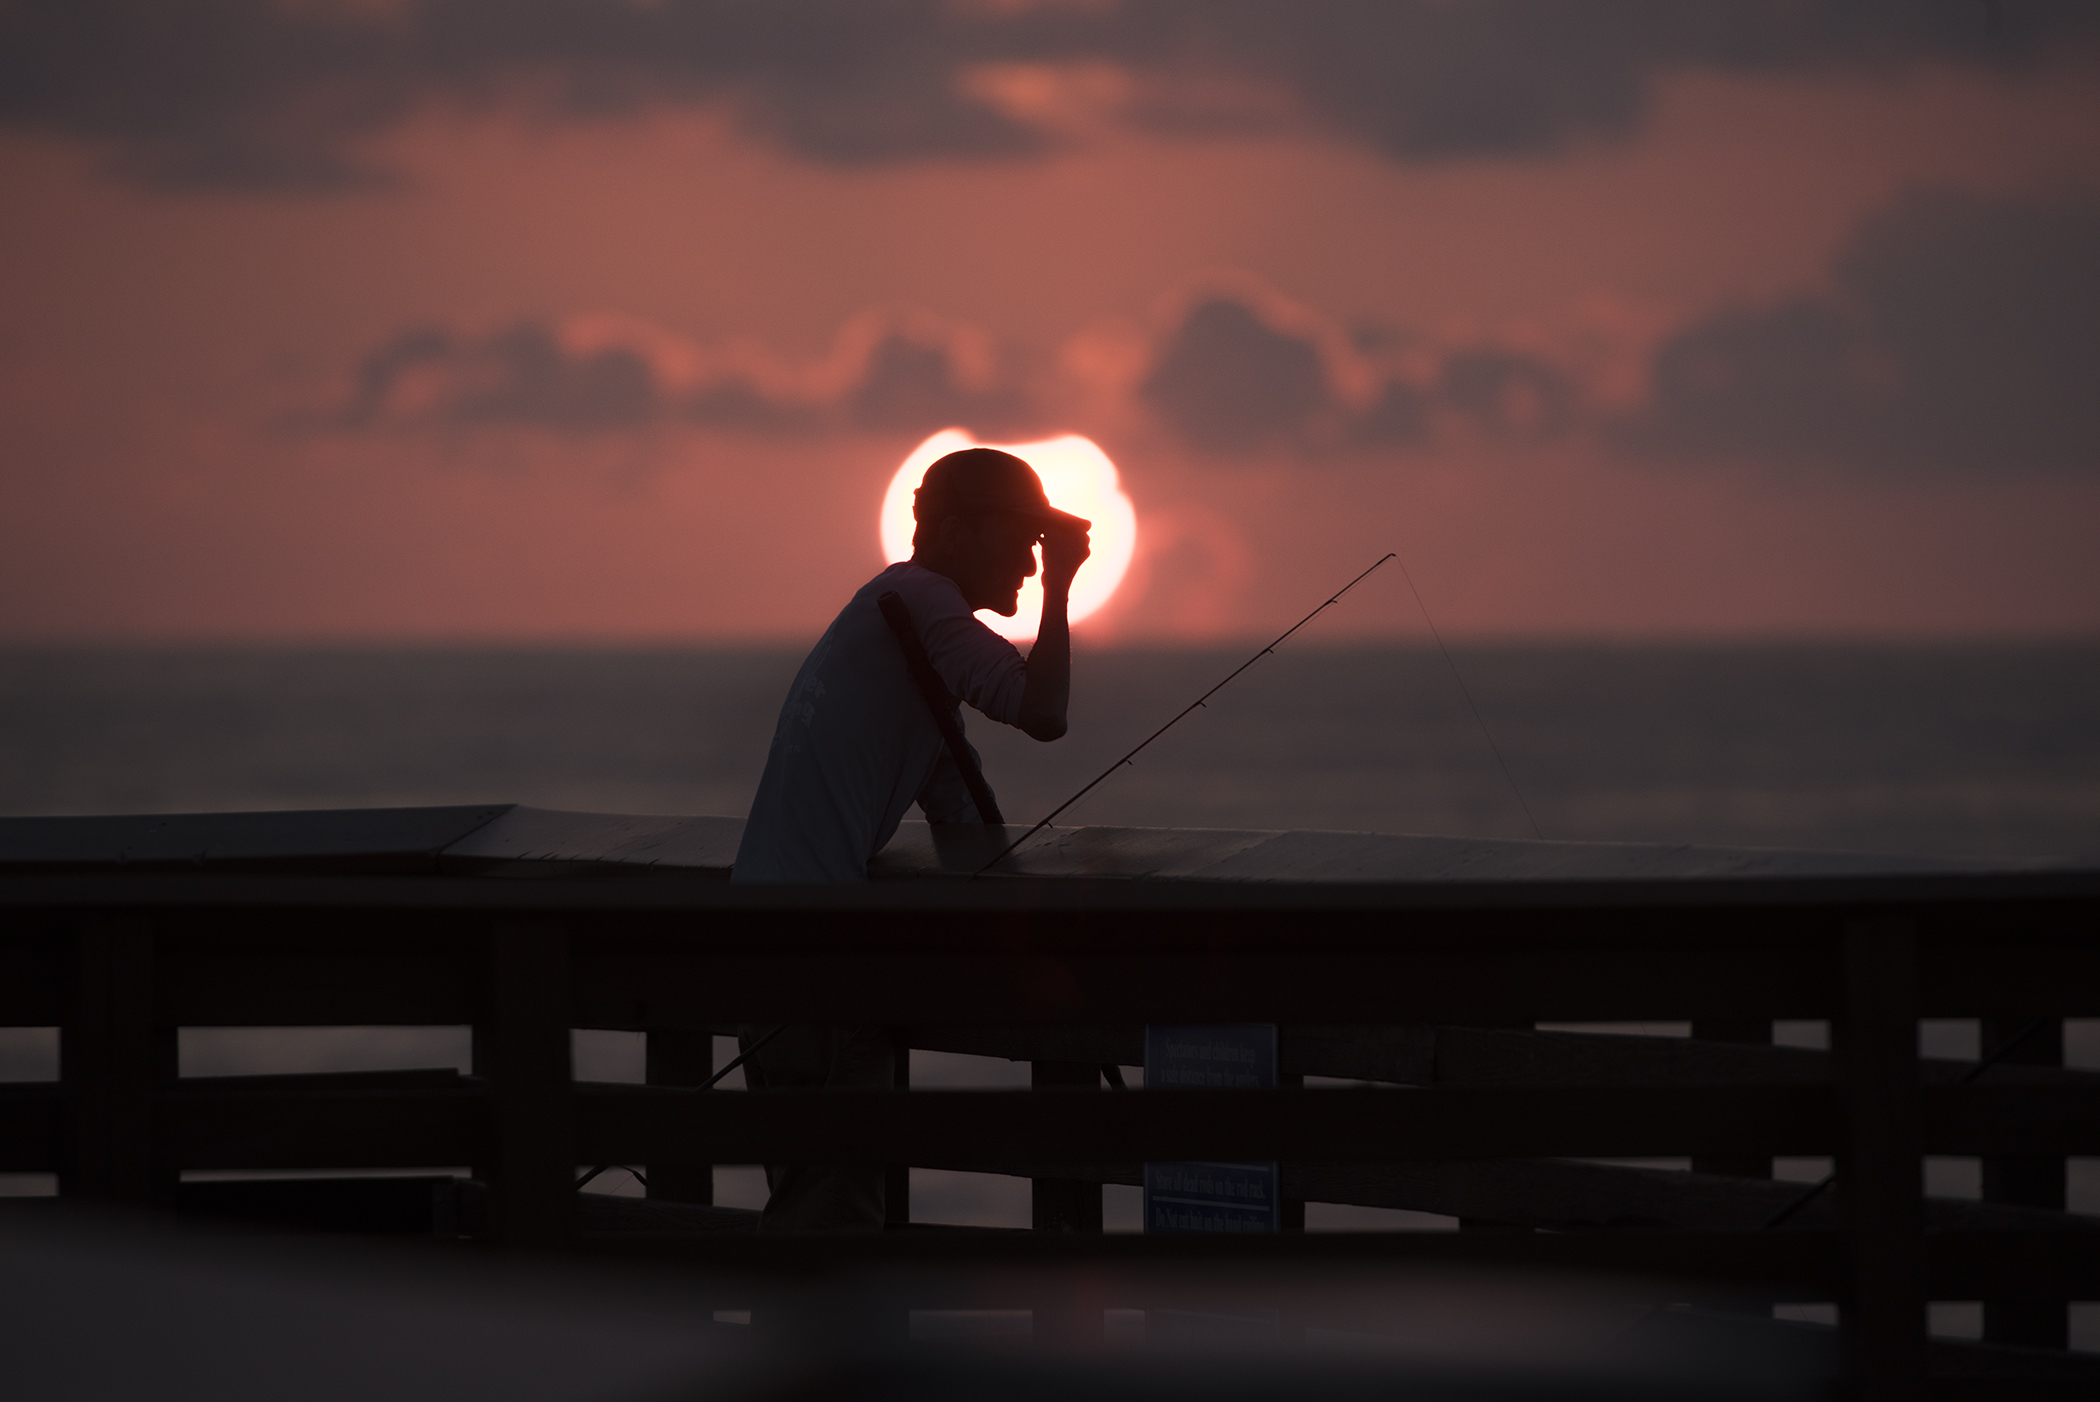  A man who asked not to be identified adjusts his cap while fishing at the Juno Beach Fishing Pier at sunrise. 